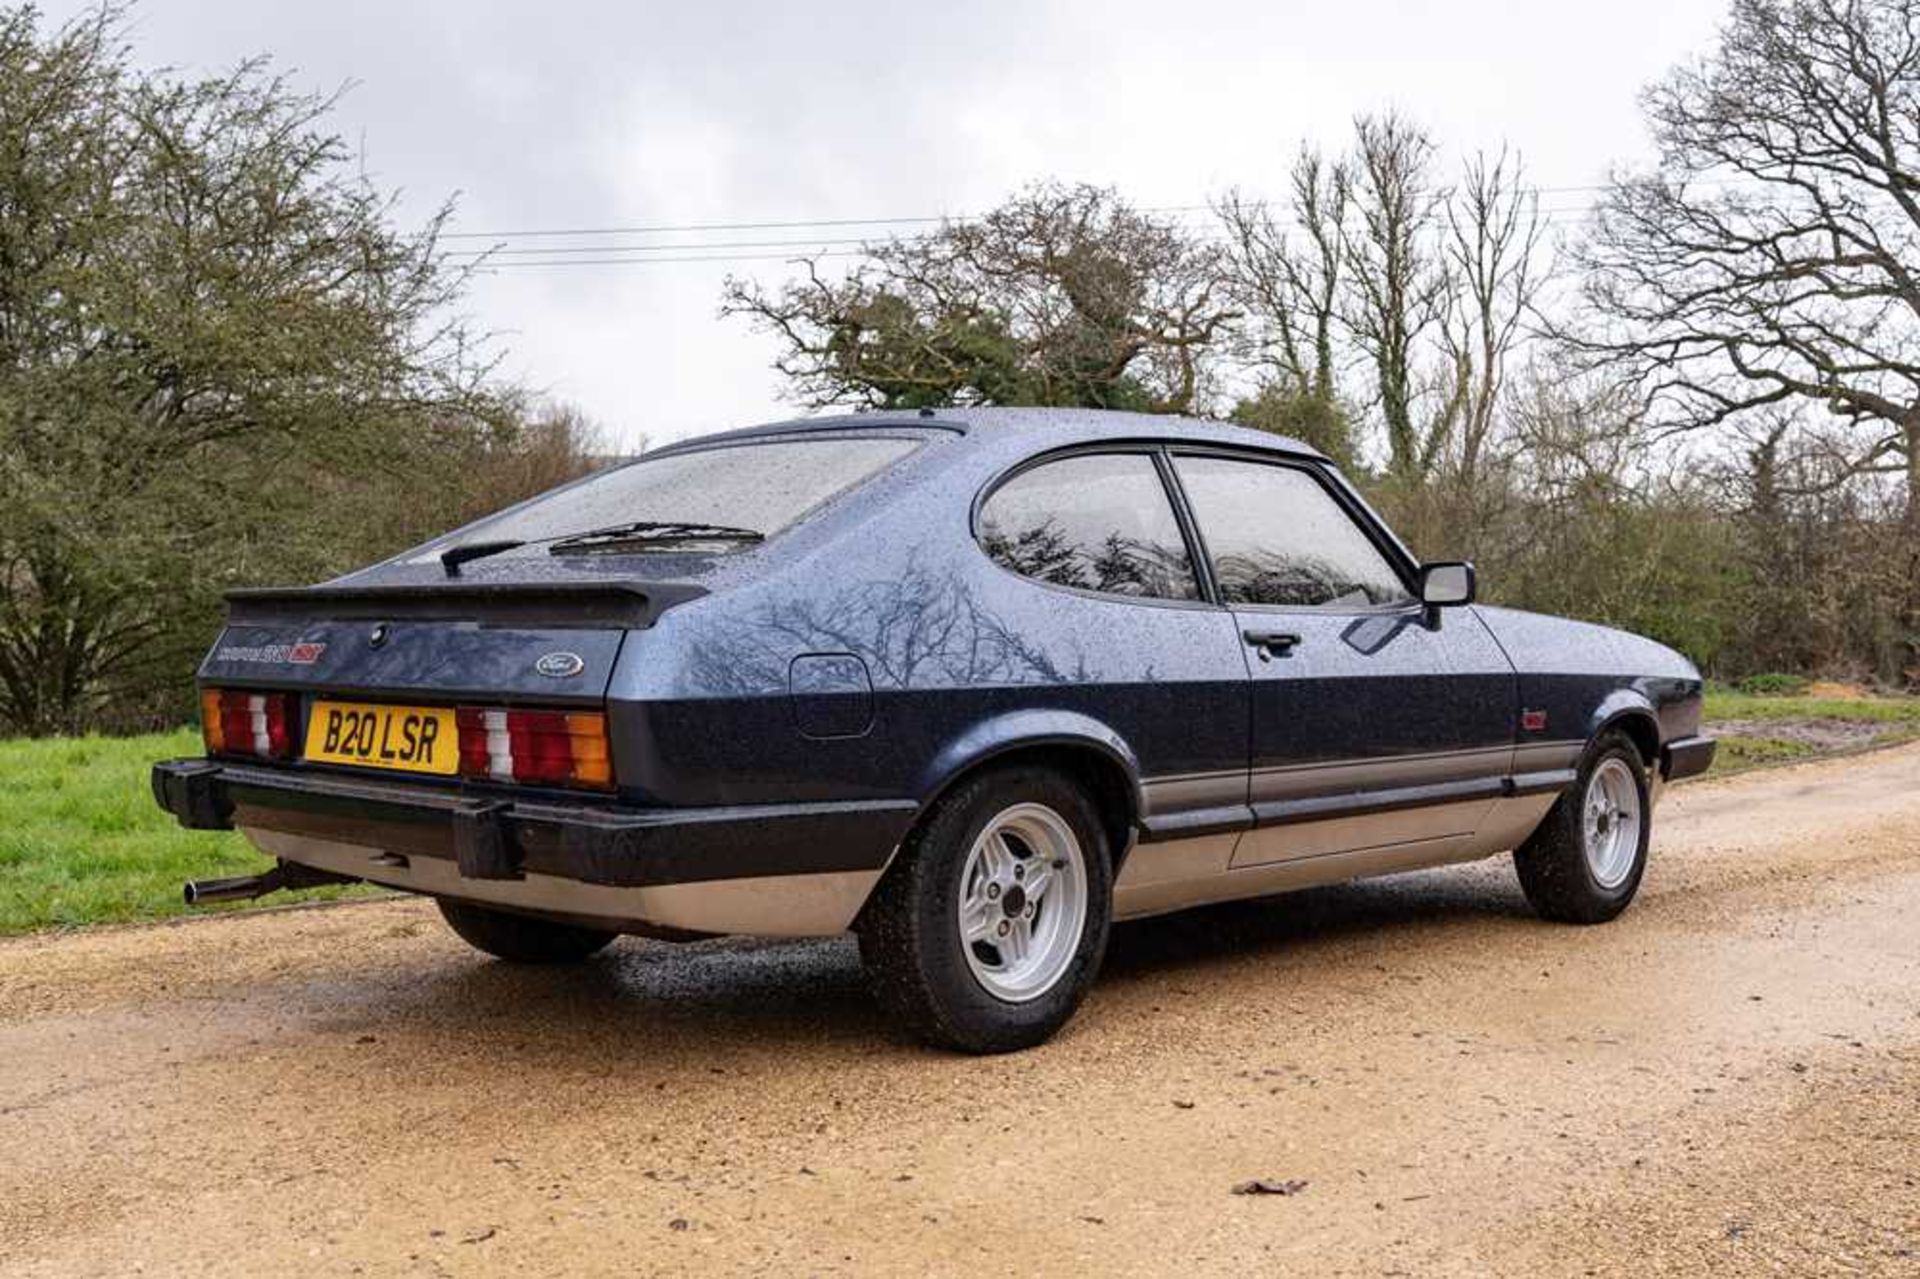 1985 Ford Capri Laser 2.0 Litre Warranted 55,300 miles from new - Image 5 of 67